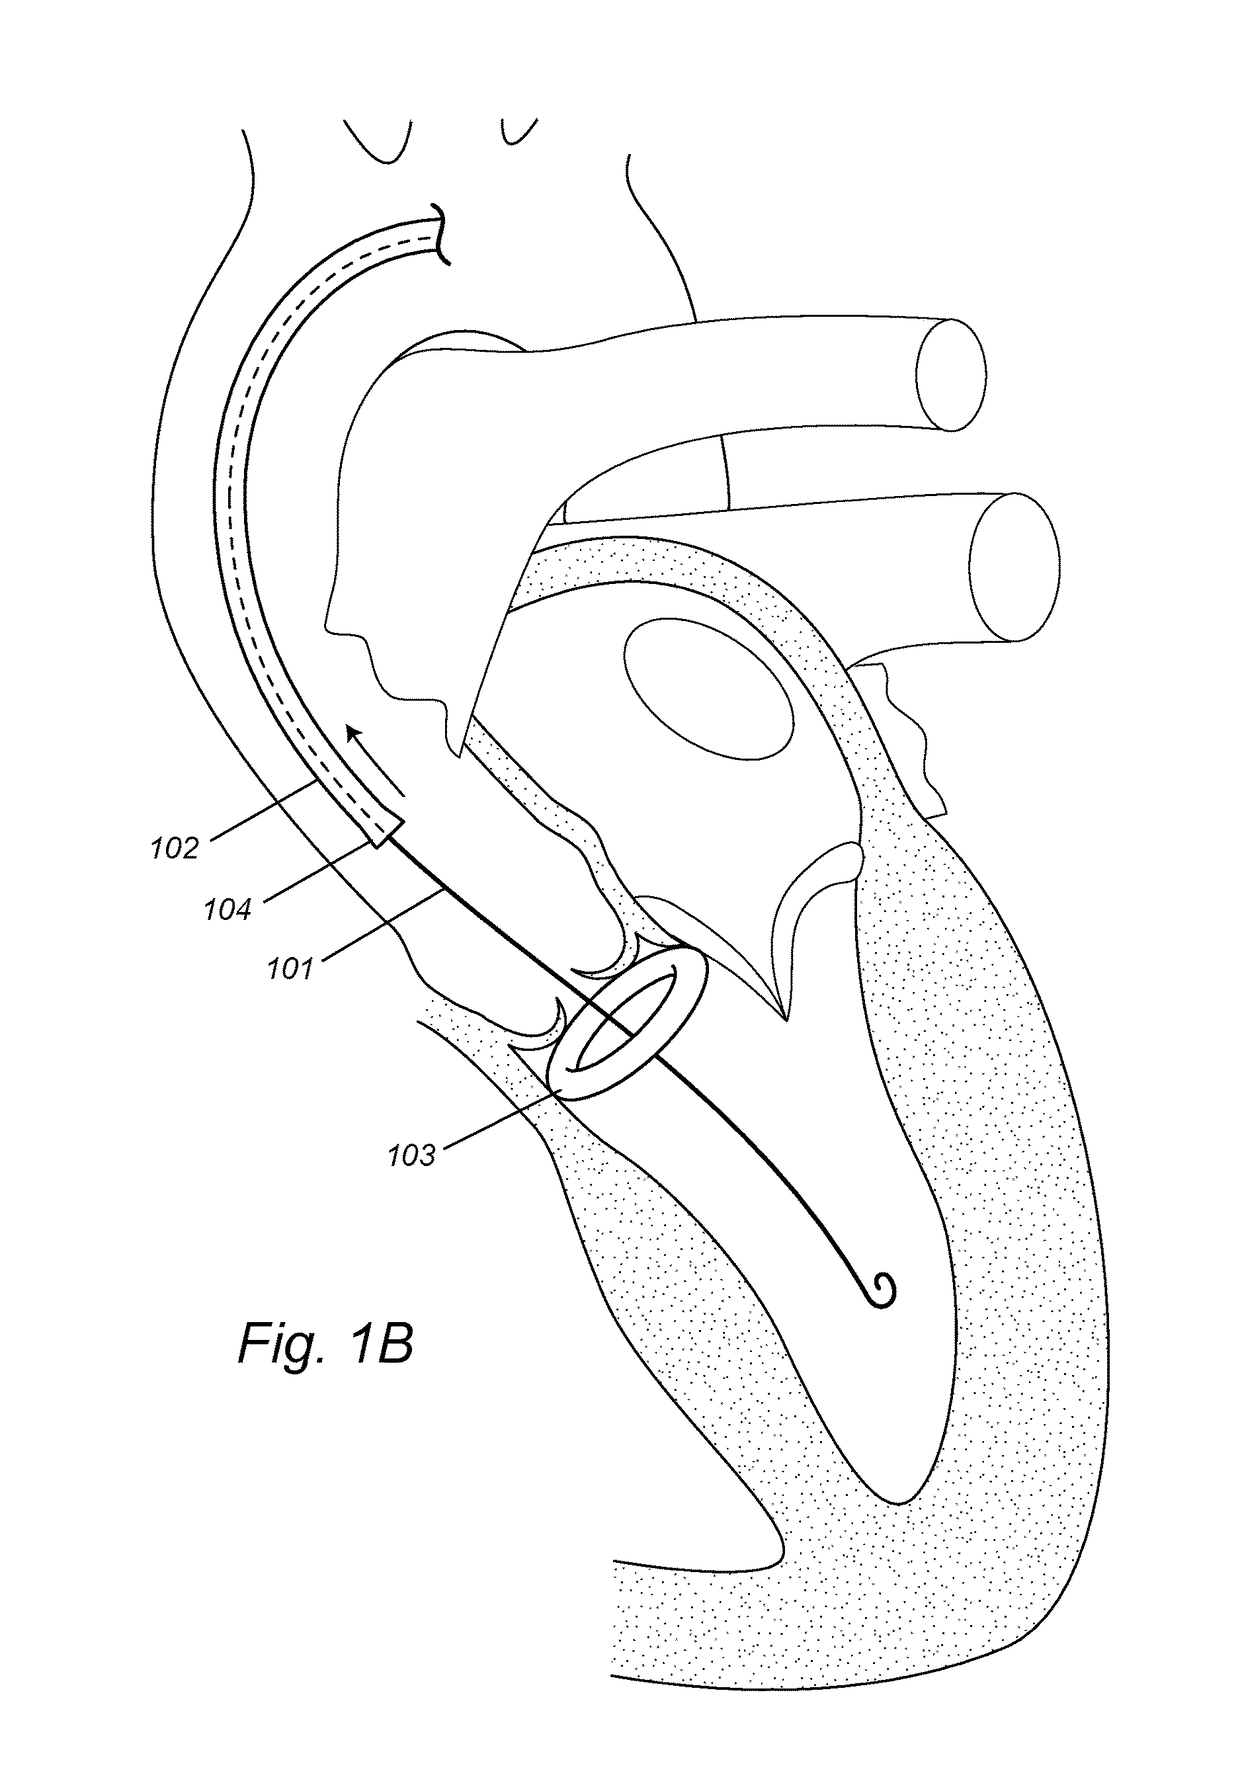 Devices, systems, and methods to optimize annular orientation of transcatheter valves